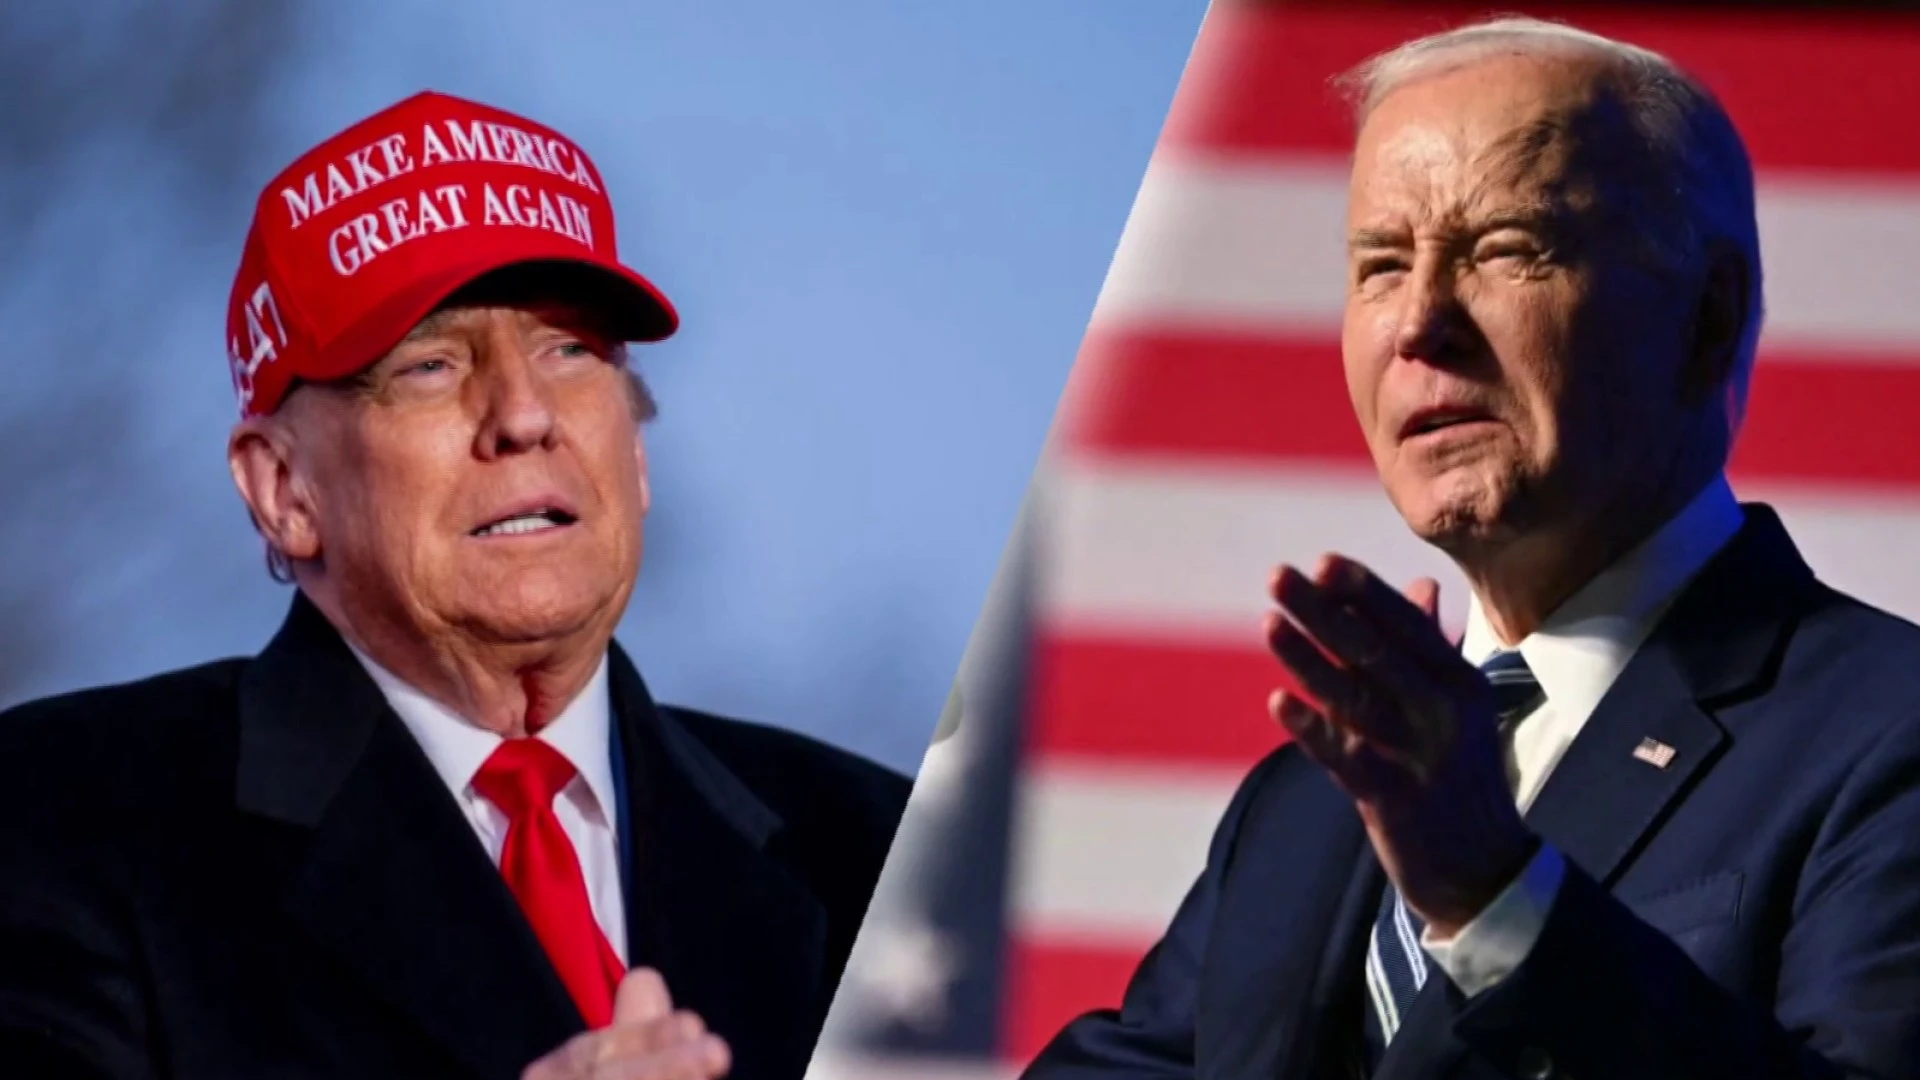 Two podiums with American flags, symbolizing the battleground of ideas between Biden and Trump.